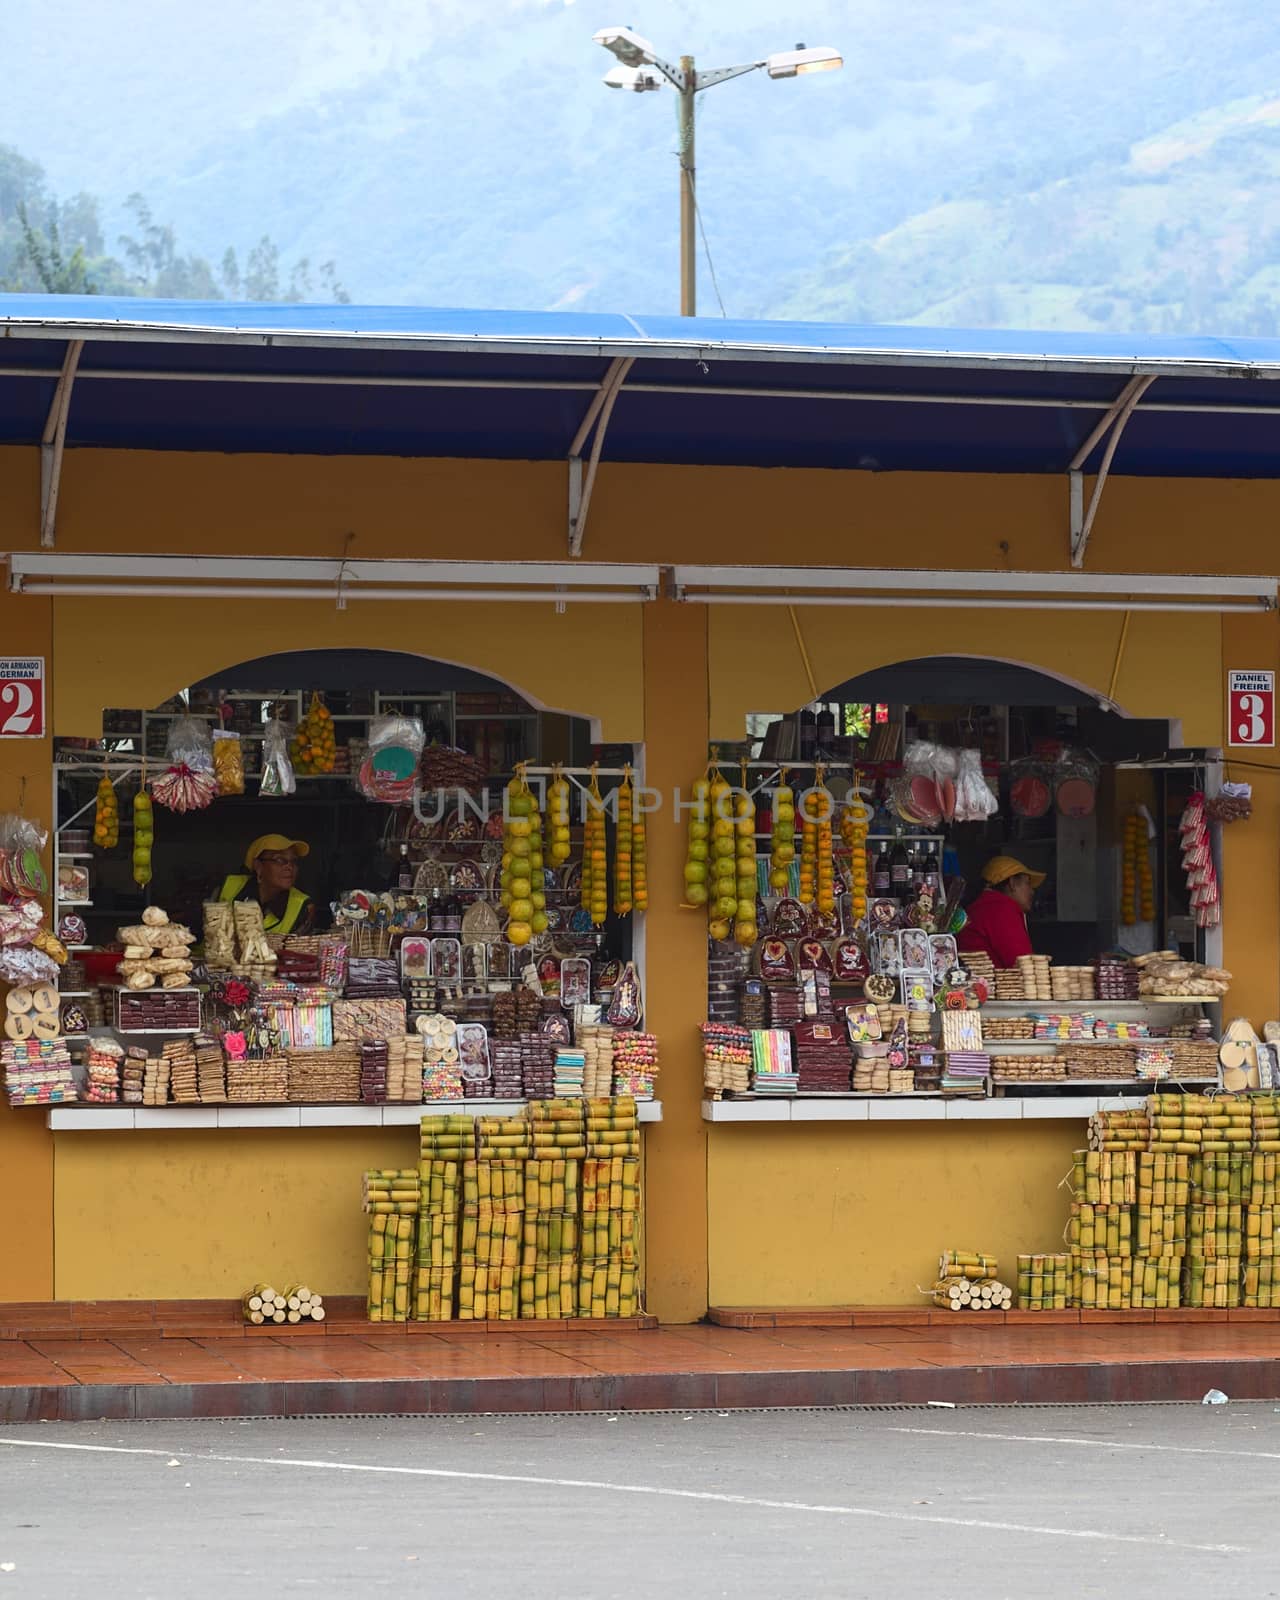 BANOS, ECUADOR - FEBRUARY 22, 2014: Unidentified people at small shops selling oranges, mandarins, sugarcane and sweets close to the bus terminal on February 22, 2014 in Banos, Ecuador. These stands are selling freshly cut sugarcane which can be eaten and is very juicy and the melcocha, which is a traditional taffy from Banos made of sugarcane.